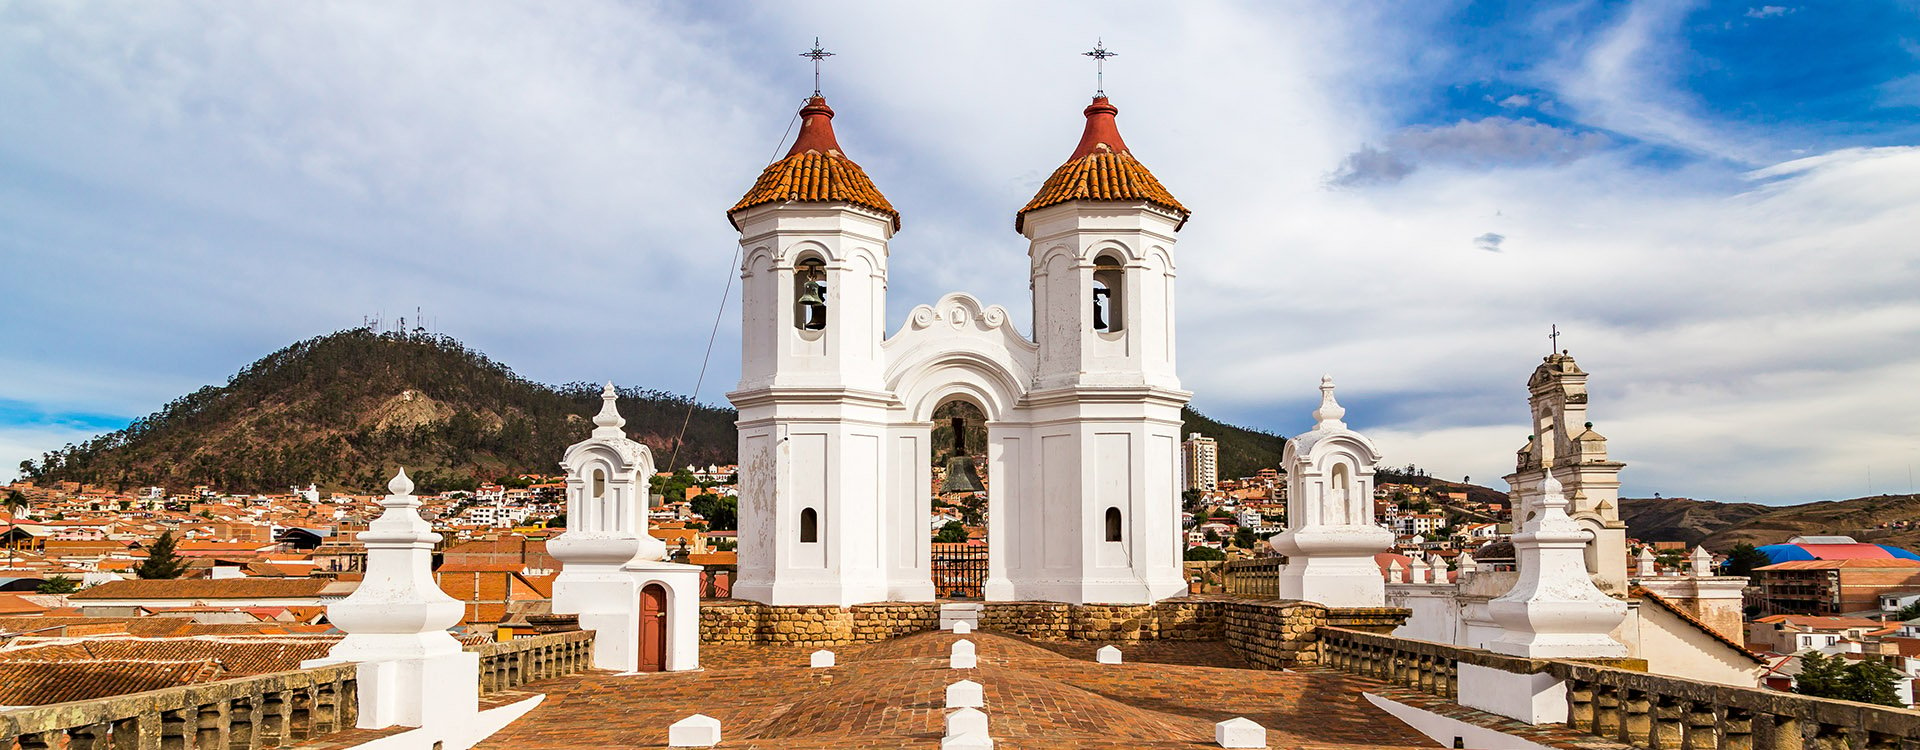 A view of downtown Sucre, Bolivia